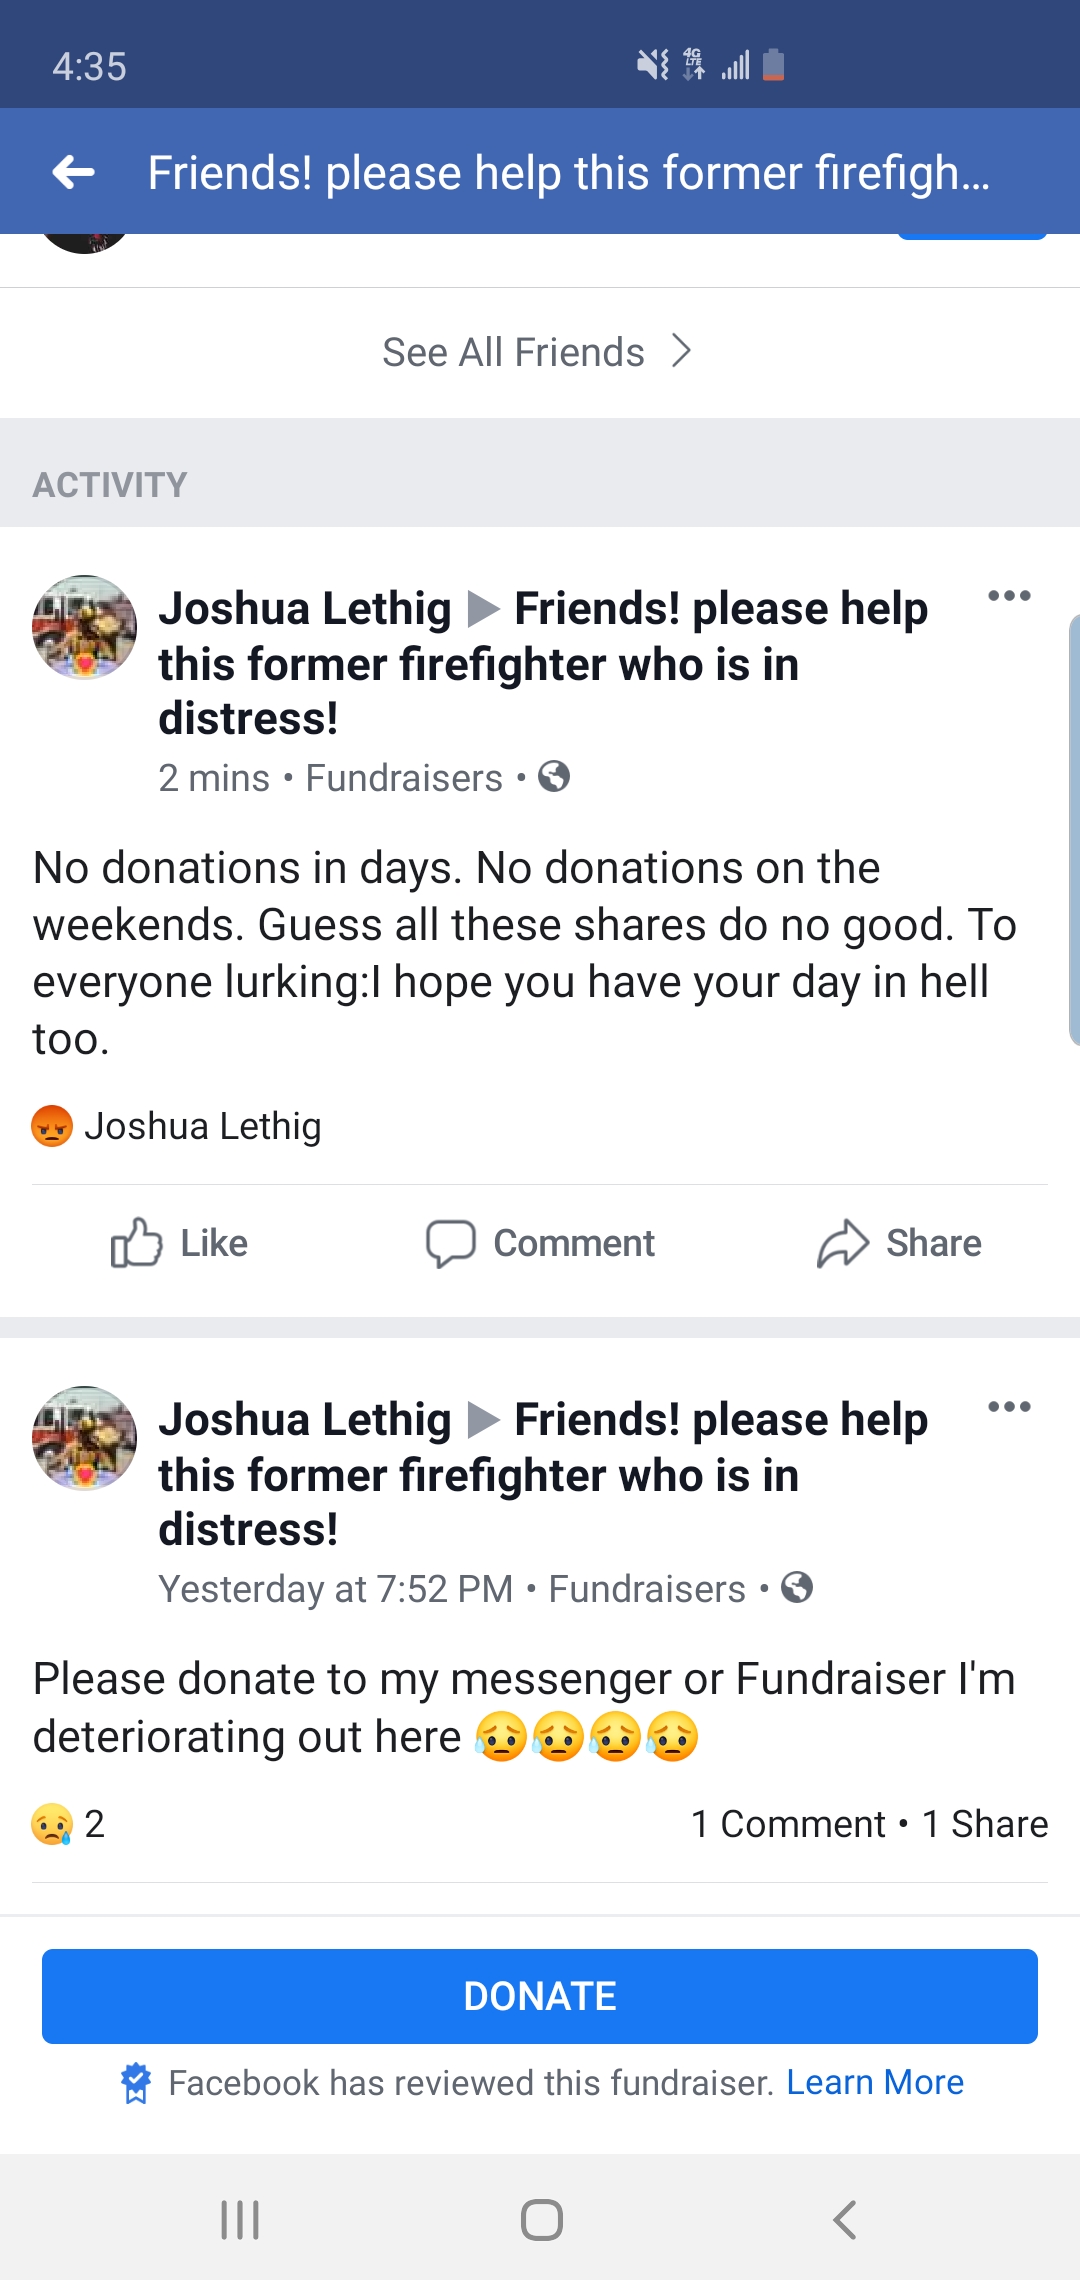 web page - Friends! please help this former firefigh... See All Friends > Activity Joshua Lethig Friends! please help this former firefighter who is in distress! 2 mins. Fundraisers. No donations in days. No donations on the weekends. Guess all these do n